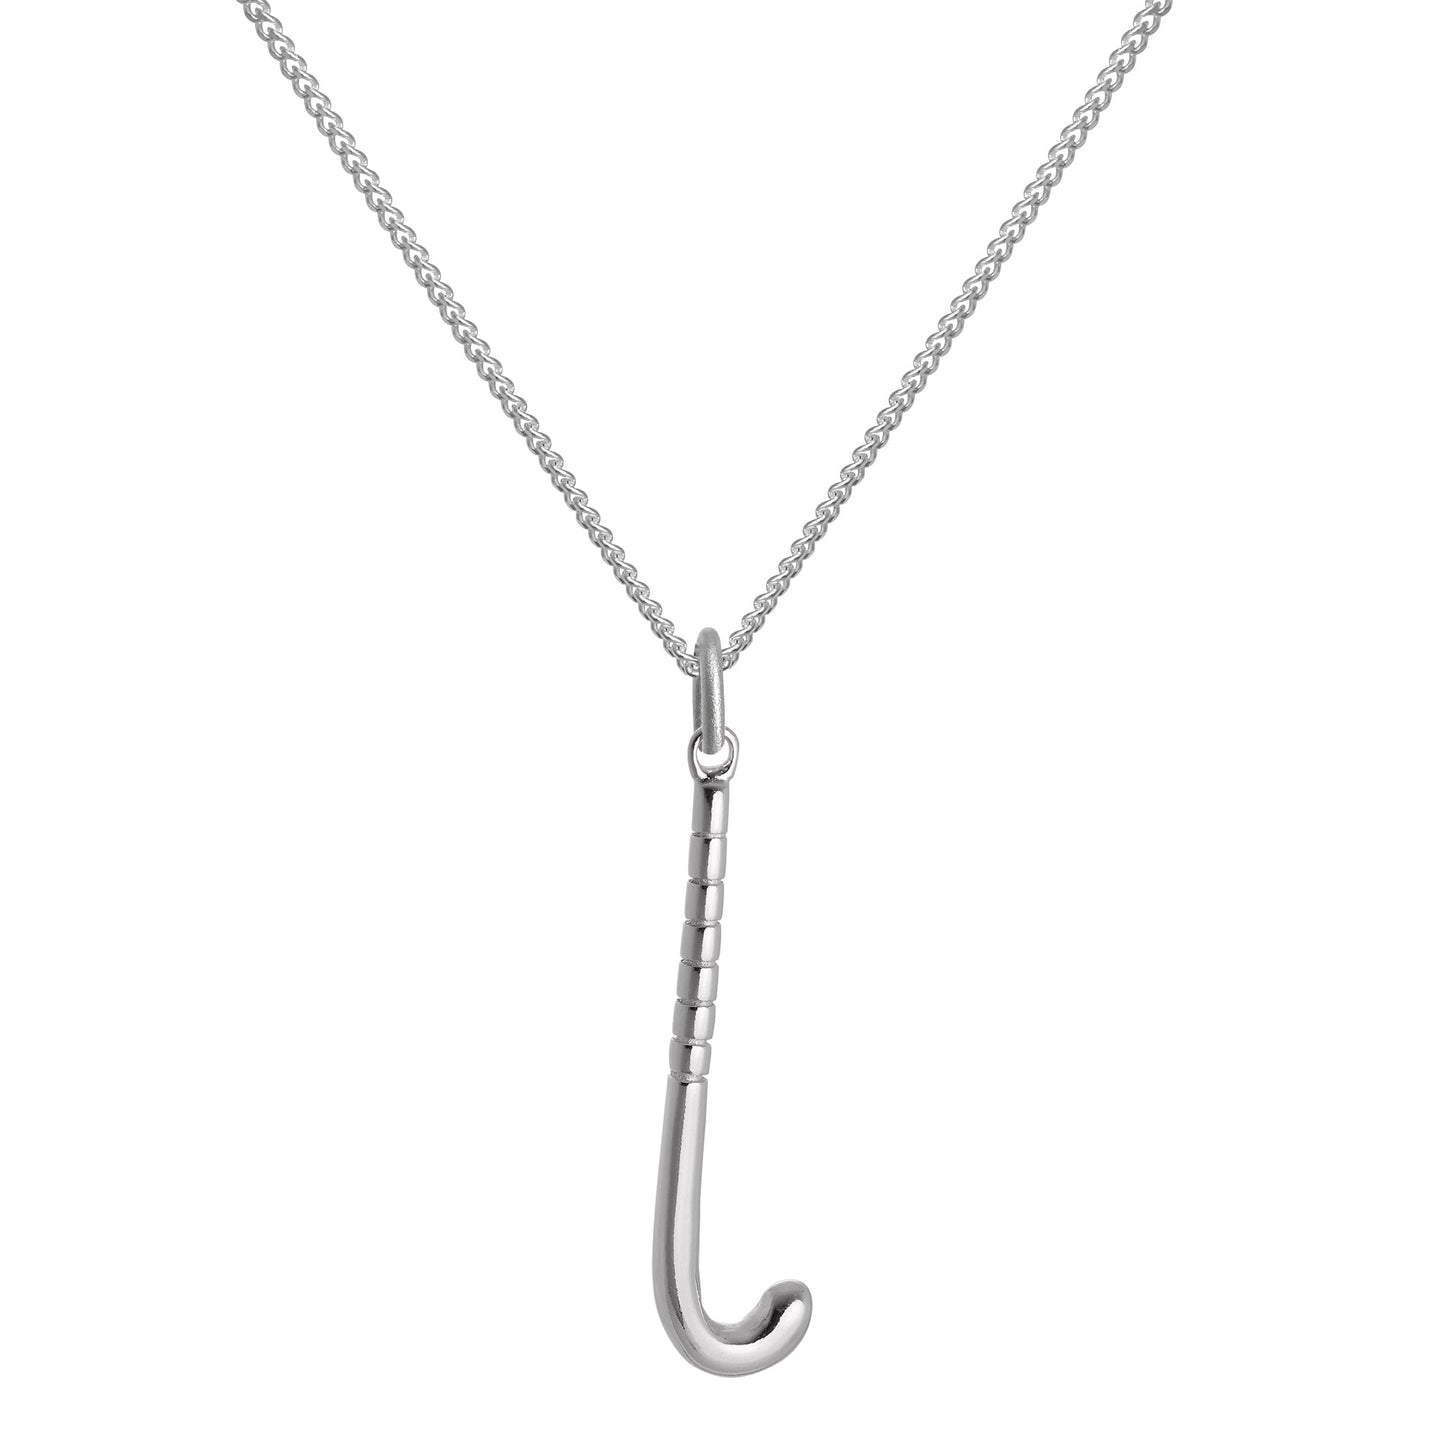 Sterling Silver Hockey Stick Pendant Necklace 16 - 22 Inches